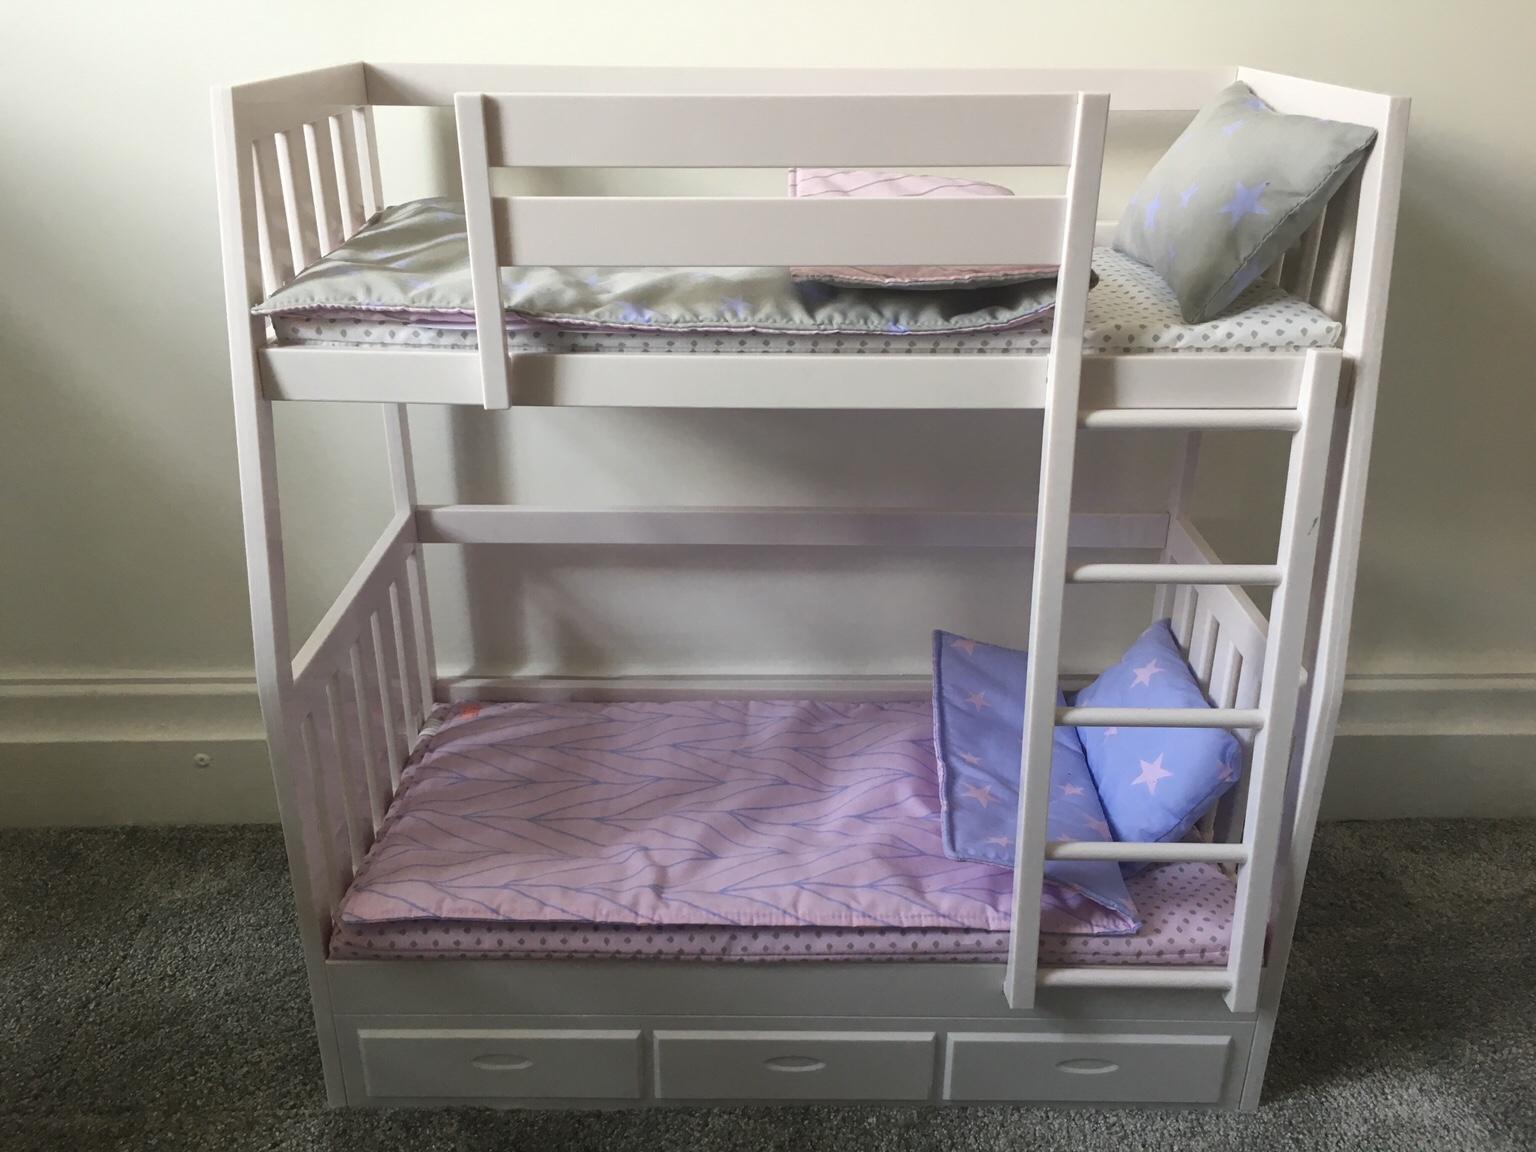 Our Generation Dream Bunk Beds In St, Our Generation Bunk Bed